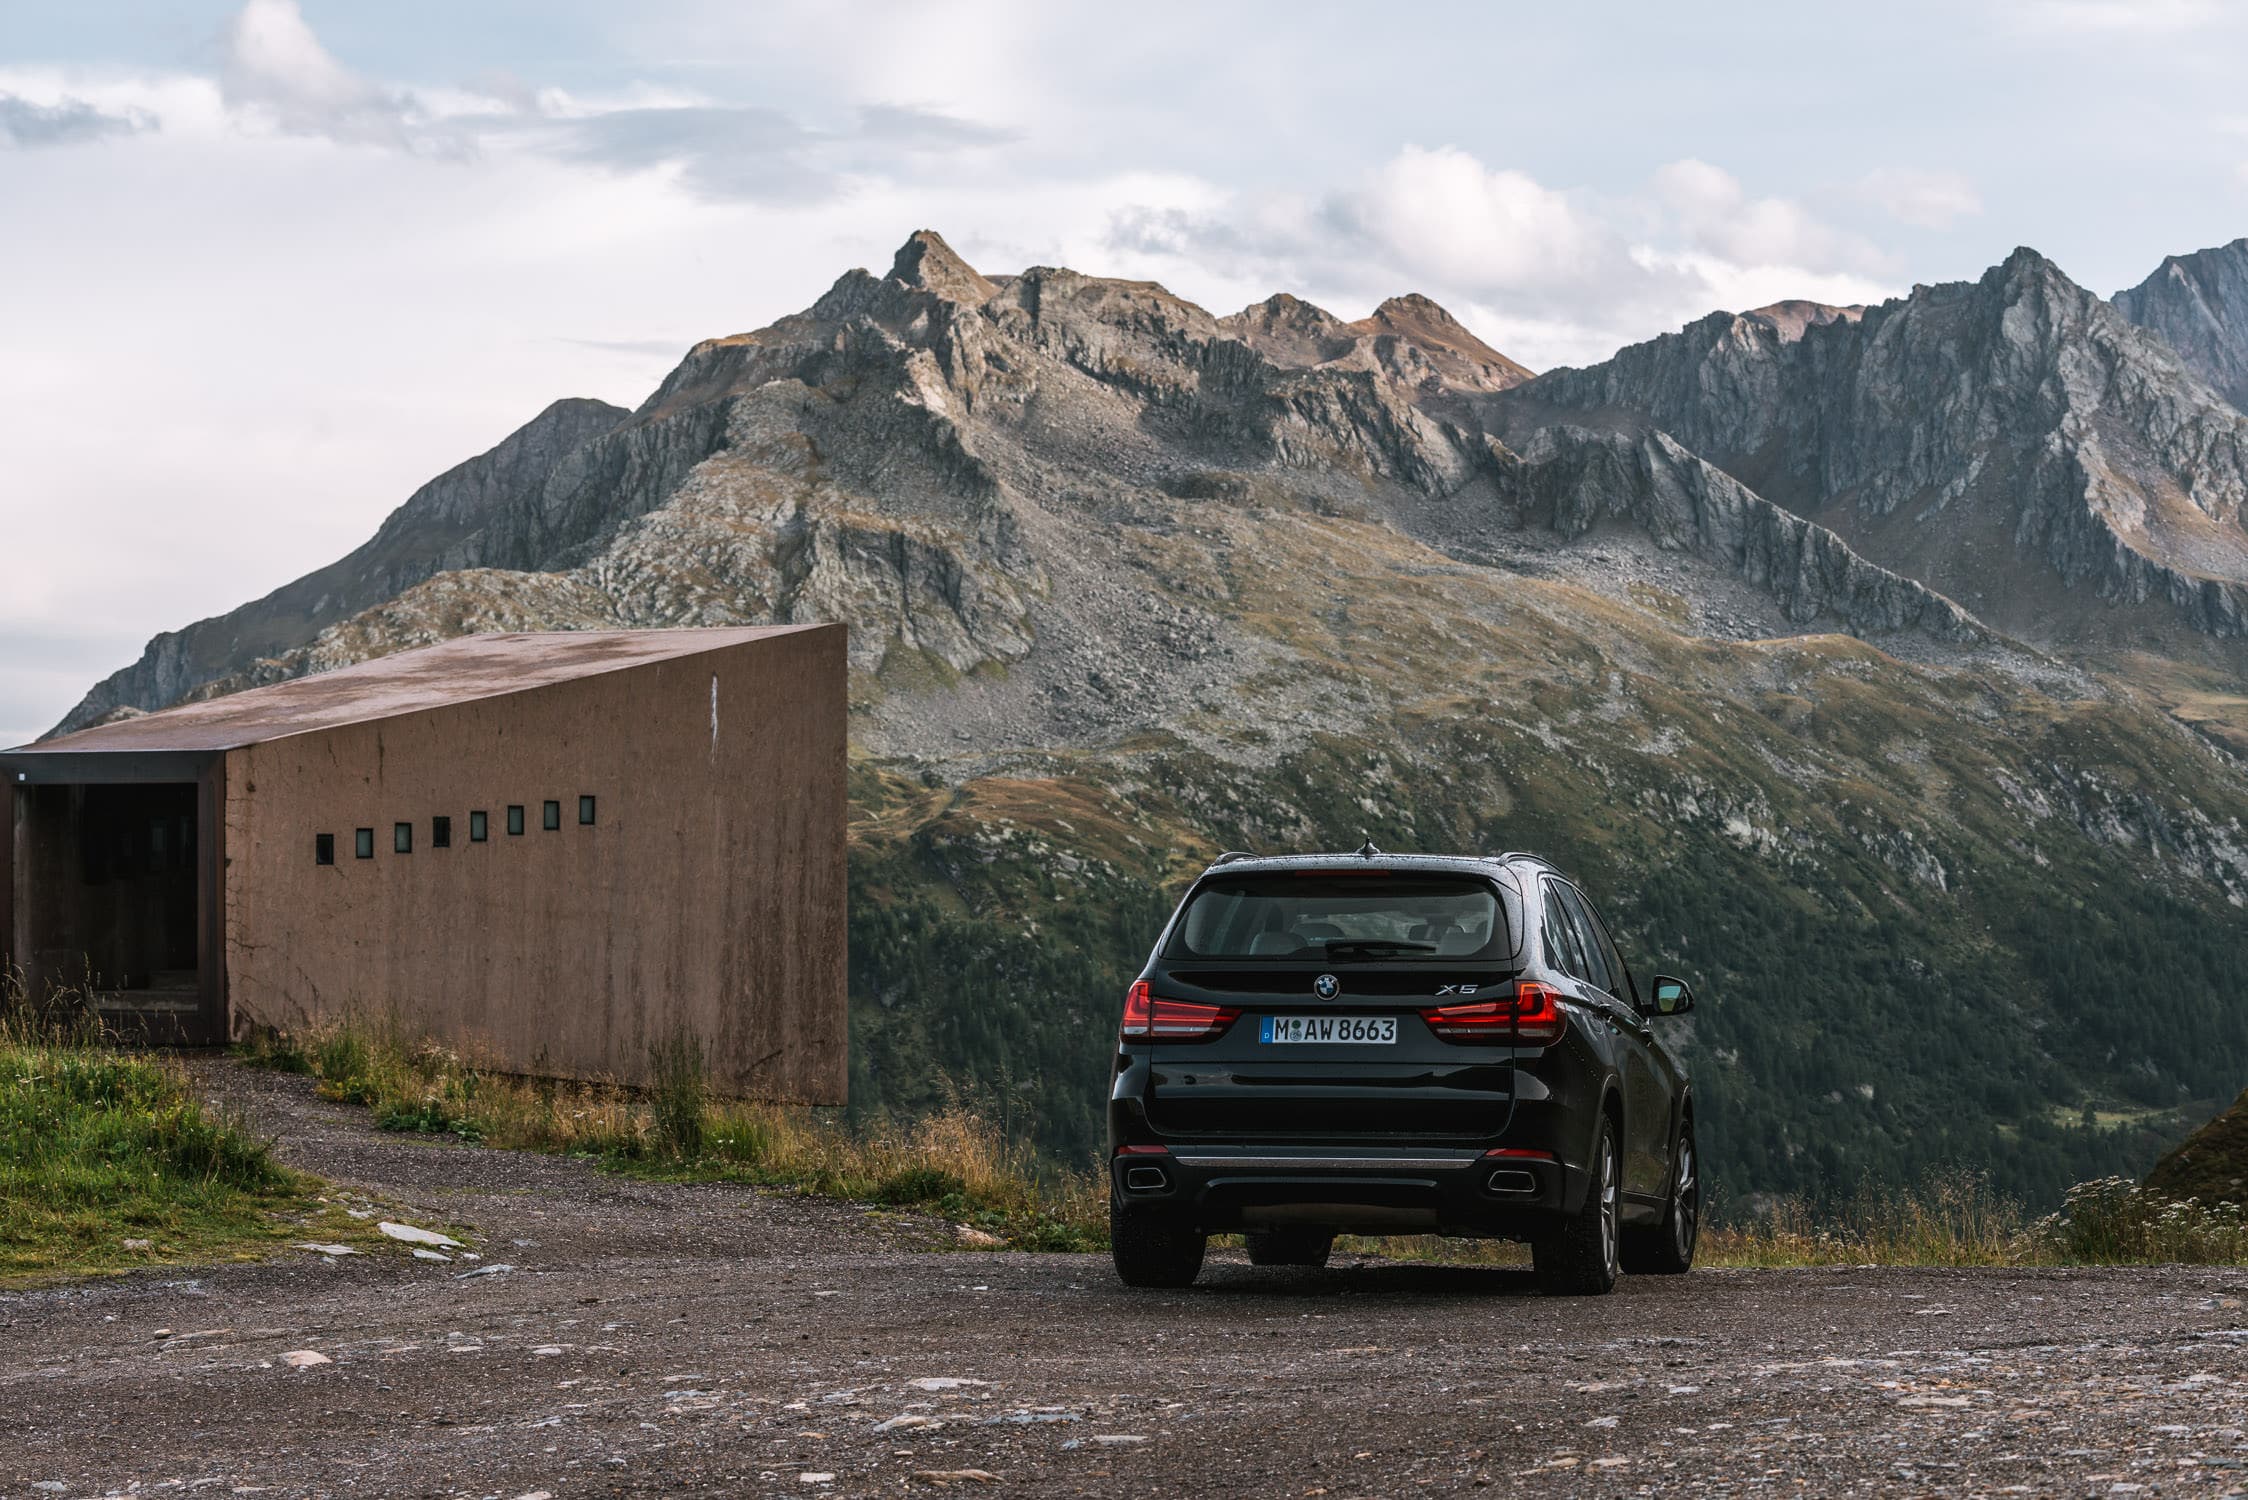 From a roadtrip through the Italian and Swiss alps for Sixt using a BMW X5 to drive through the mountain landscapes by photographer Michael Schauer